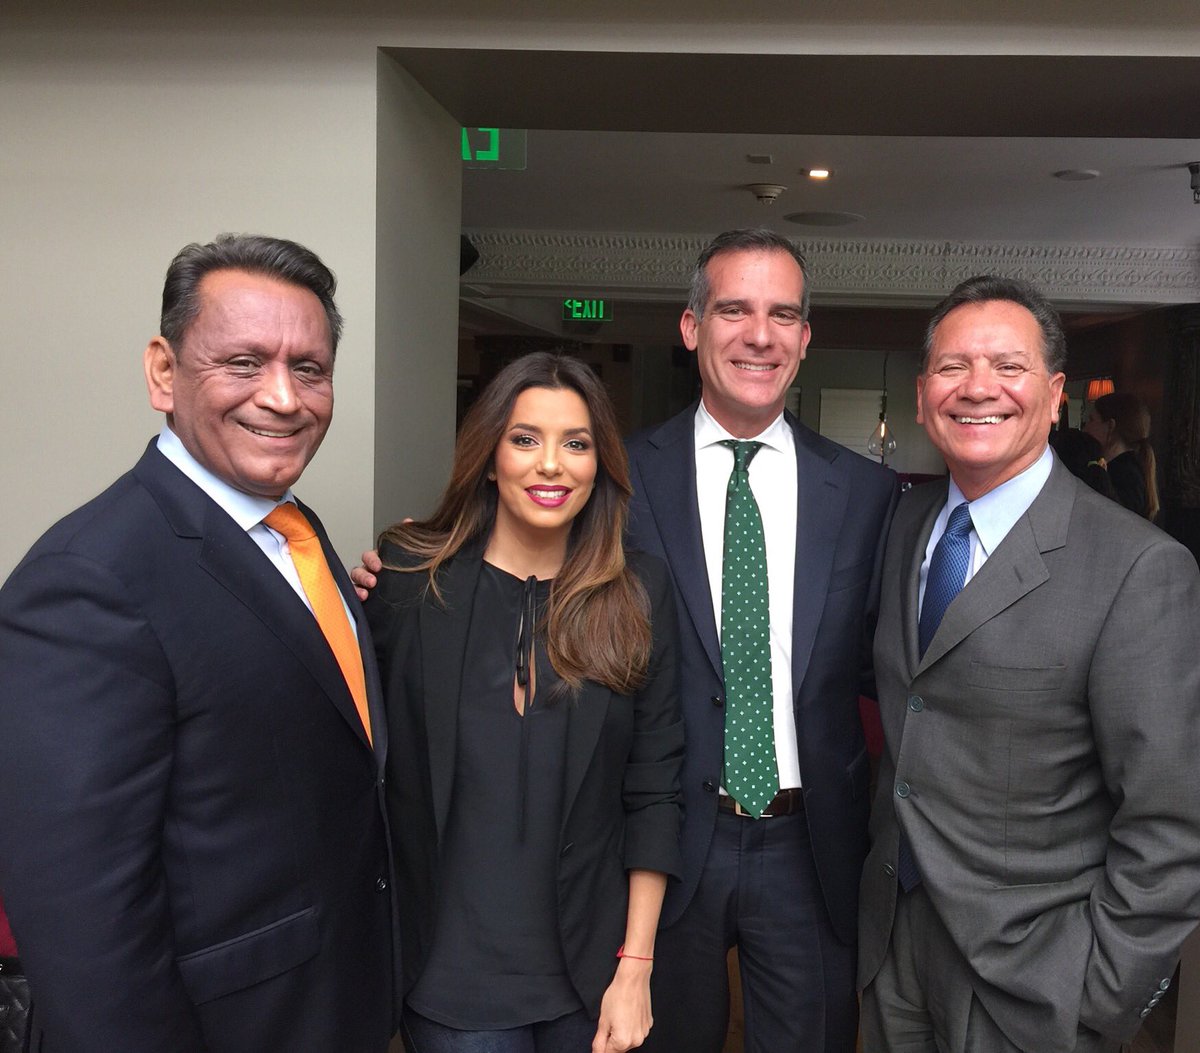 Celebrating mine & Gil Cedillo's bdays with a special luncheon for @iamhope TY @ericgarcetti @cordobacorp #WeAreHOPE https://t.co/dms9xUzdef